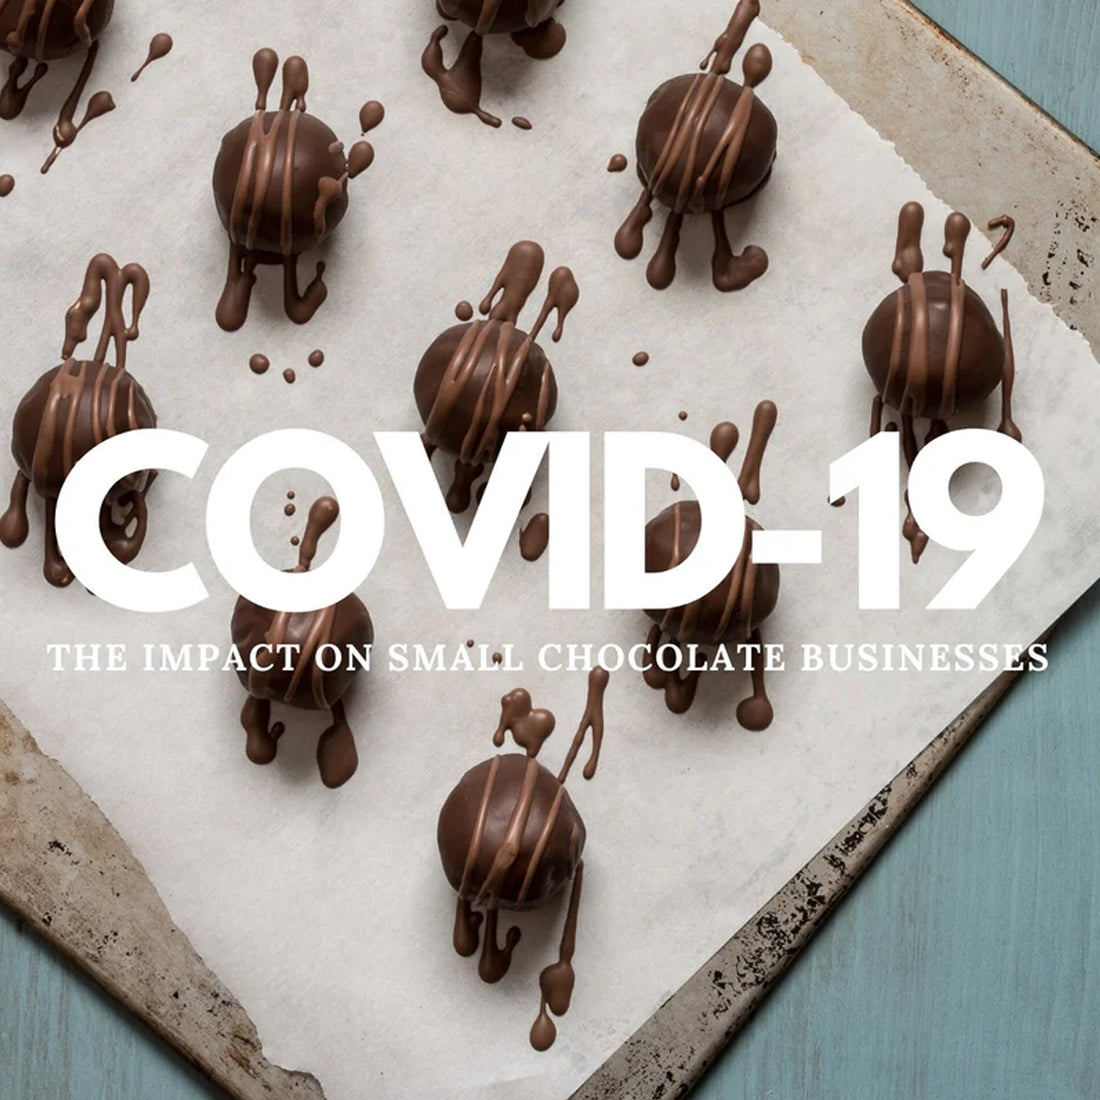 The bittersweet impact of COVID-19 on the cocoa and chocolate market